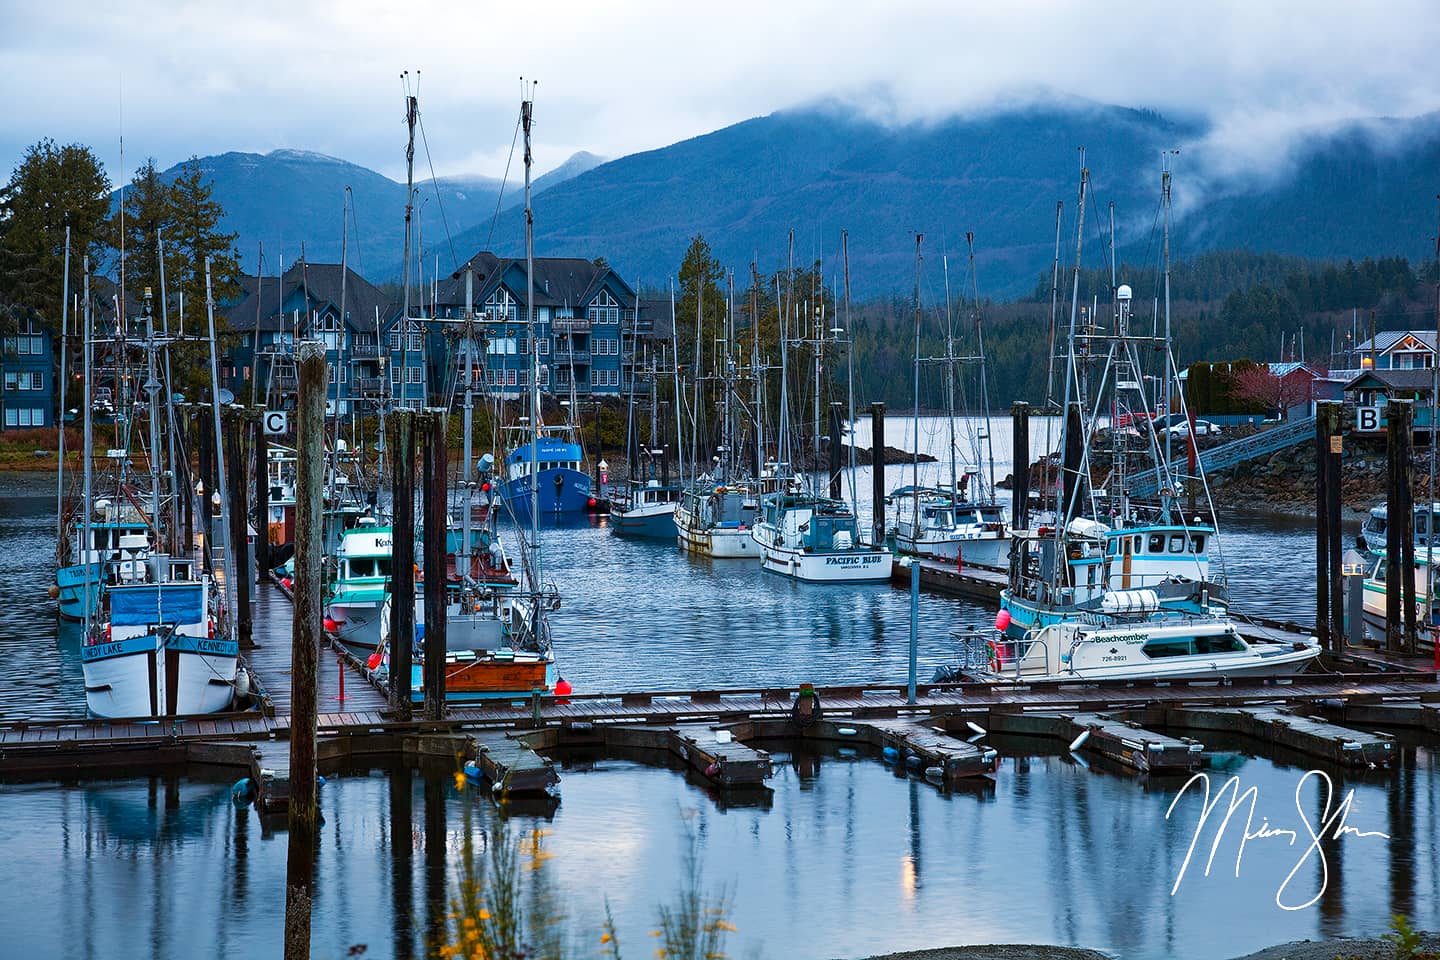 Morning at Ucluelet Harbour - Ucluelet Harbour, Vancouver Island, British Columbia, Canada